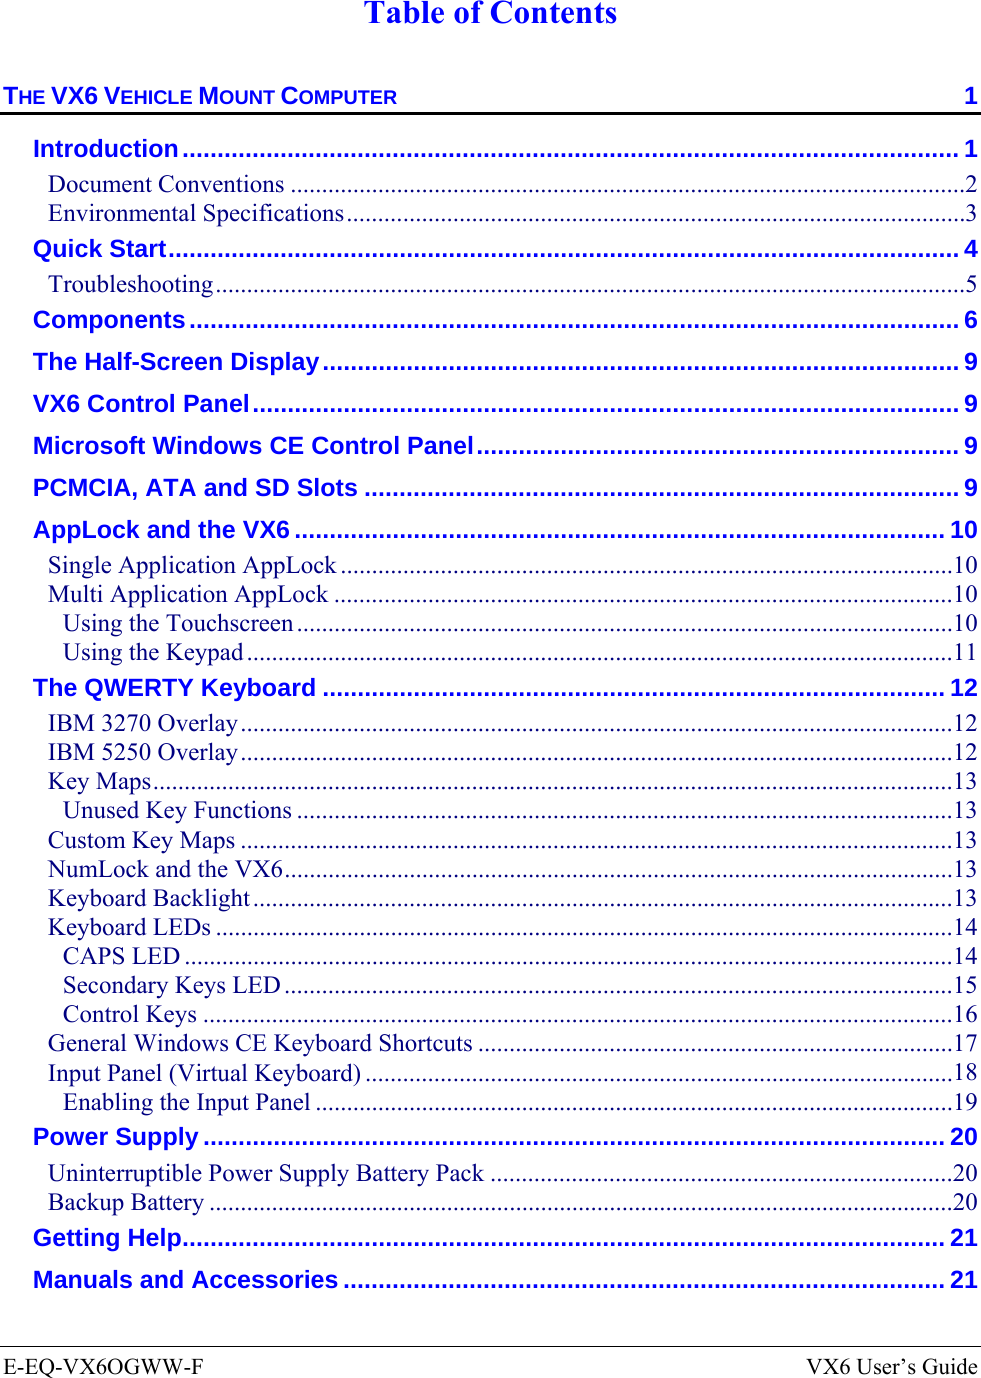  E-EQ-VX6OGWW-F  VX6 User’s Guide  Table of Contents THE VX6 VEHICLE MOUNT COMPUTER  1 Introduction............................................................................................................... 1 Document Conventions ............................................................................................................2 Environmental Specifications...................................................................................................3 Quick Start................................................................................................................. 4 Troubleshooting........................................................................................................................5 Components.............................................................................................................. 6 The Half-Screen Display........................................................................................... 9 VX6 Control Panel..................................................................................................... 9 Microsoft Windows CE Control Panel..................................................................... 9 PCMCIA, ATA and SD Slots ..................................................................................... 9 AppLock and the VX6............................................................................................. 10 Single Application AppLock ..................................................................................................10 Multi Application AppLock ...................................................................................................10 Using the Touchscreen .........................................................................................................10 Using the Keypad .................................................................................................................11 The QWERTY Keyboard ......................................................................................... 12 IBM 3270 Overlay..................................................................................................................12 IBM 5250 Overlay..................................................................................................................12 Key Maps................................................................................................................................13 Unused Key Functions .........................................................................................................13 Custom Key Maps ..................................................................................................................13 NumLock and the VX6...........................................................................................................13 Keyboard Backlight................................................................................................................13 Keyboard LEDs ......................................................................................................................14 CAPS LED ...........................................................................................................................14 Secondary Keys LED ...........................................................................................................15 Control Keys ........................................................................................................................16 General Windows CE Keyboard Shortcuts ............................................................................17 Input Panel (Virtual Keyboard) ..............................................................................................18 Enabling the Input Panel ......................................................................................................19 Power Supply .......................................................................................................... 20 Uninterruptible Power Supply Battery Pack ..........................................................................20 Backup Battery .......................................................................................................................20 Getting Help............................................................................................................. 21 Manuals and Accessories ...................................................................................... 21 